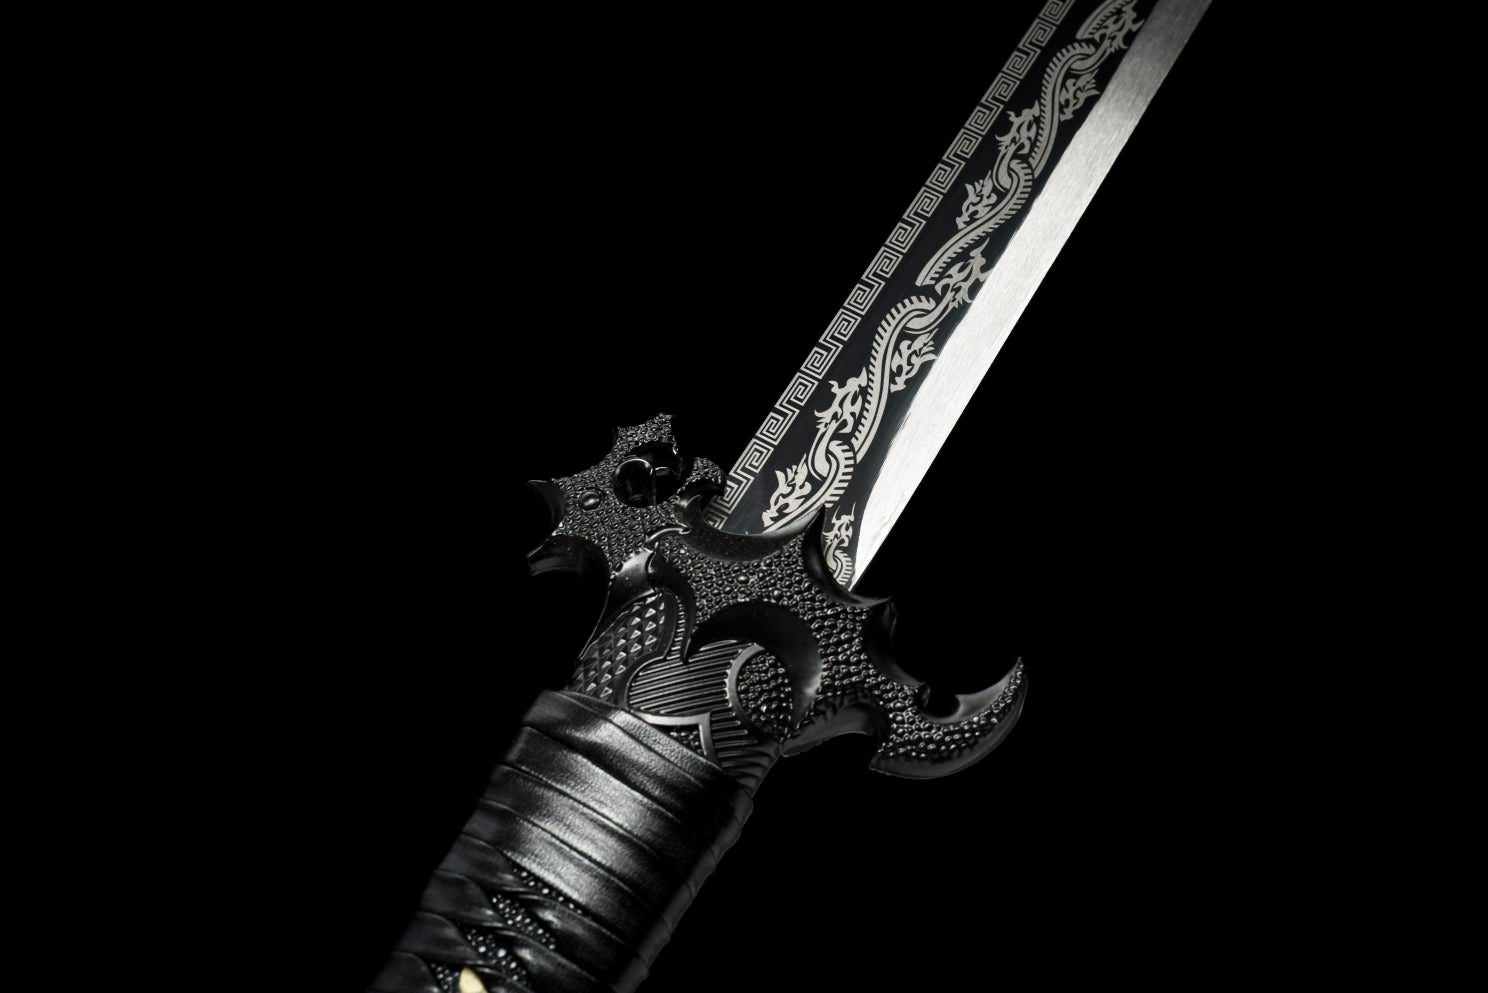 LOONGSWORD Dragon Tang dao Sword,Hand Forged High Carbon Steel Etched Blade,Alloy Fittings